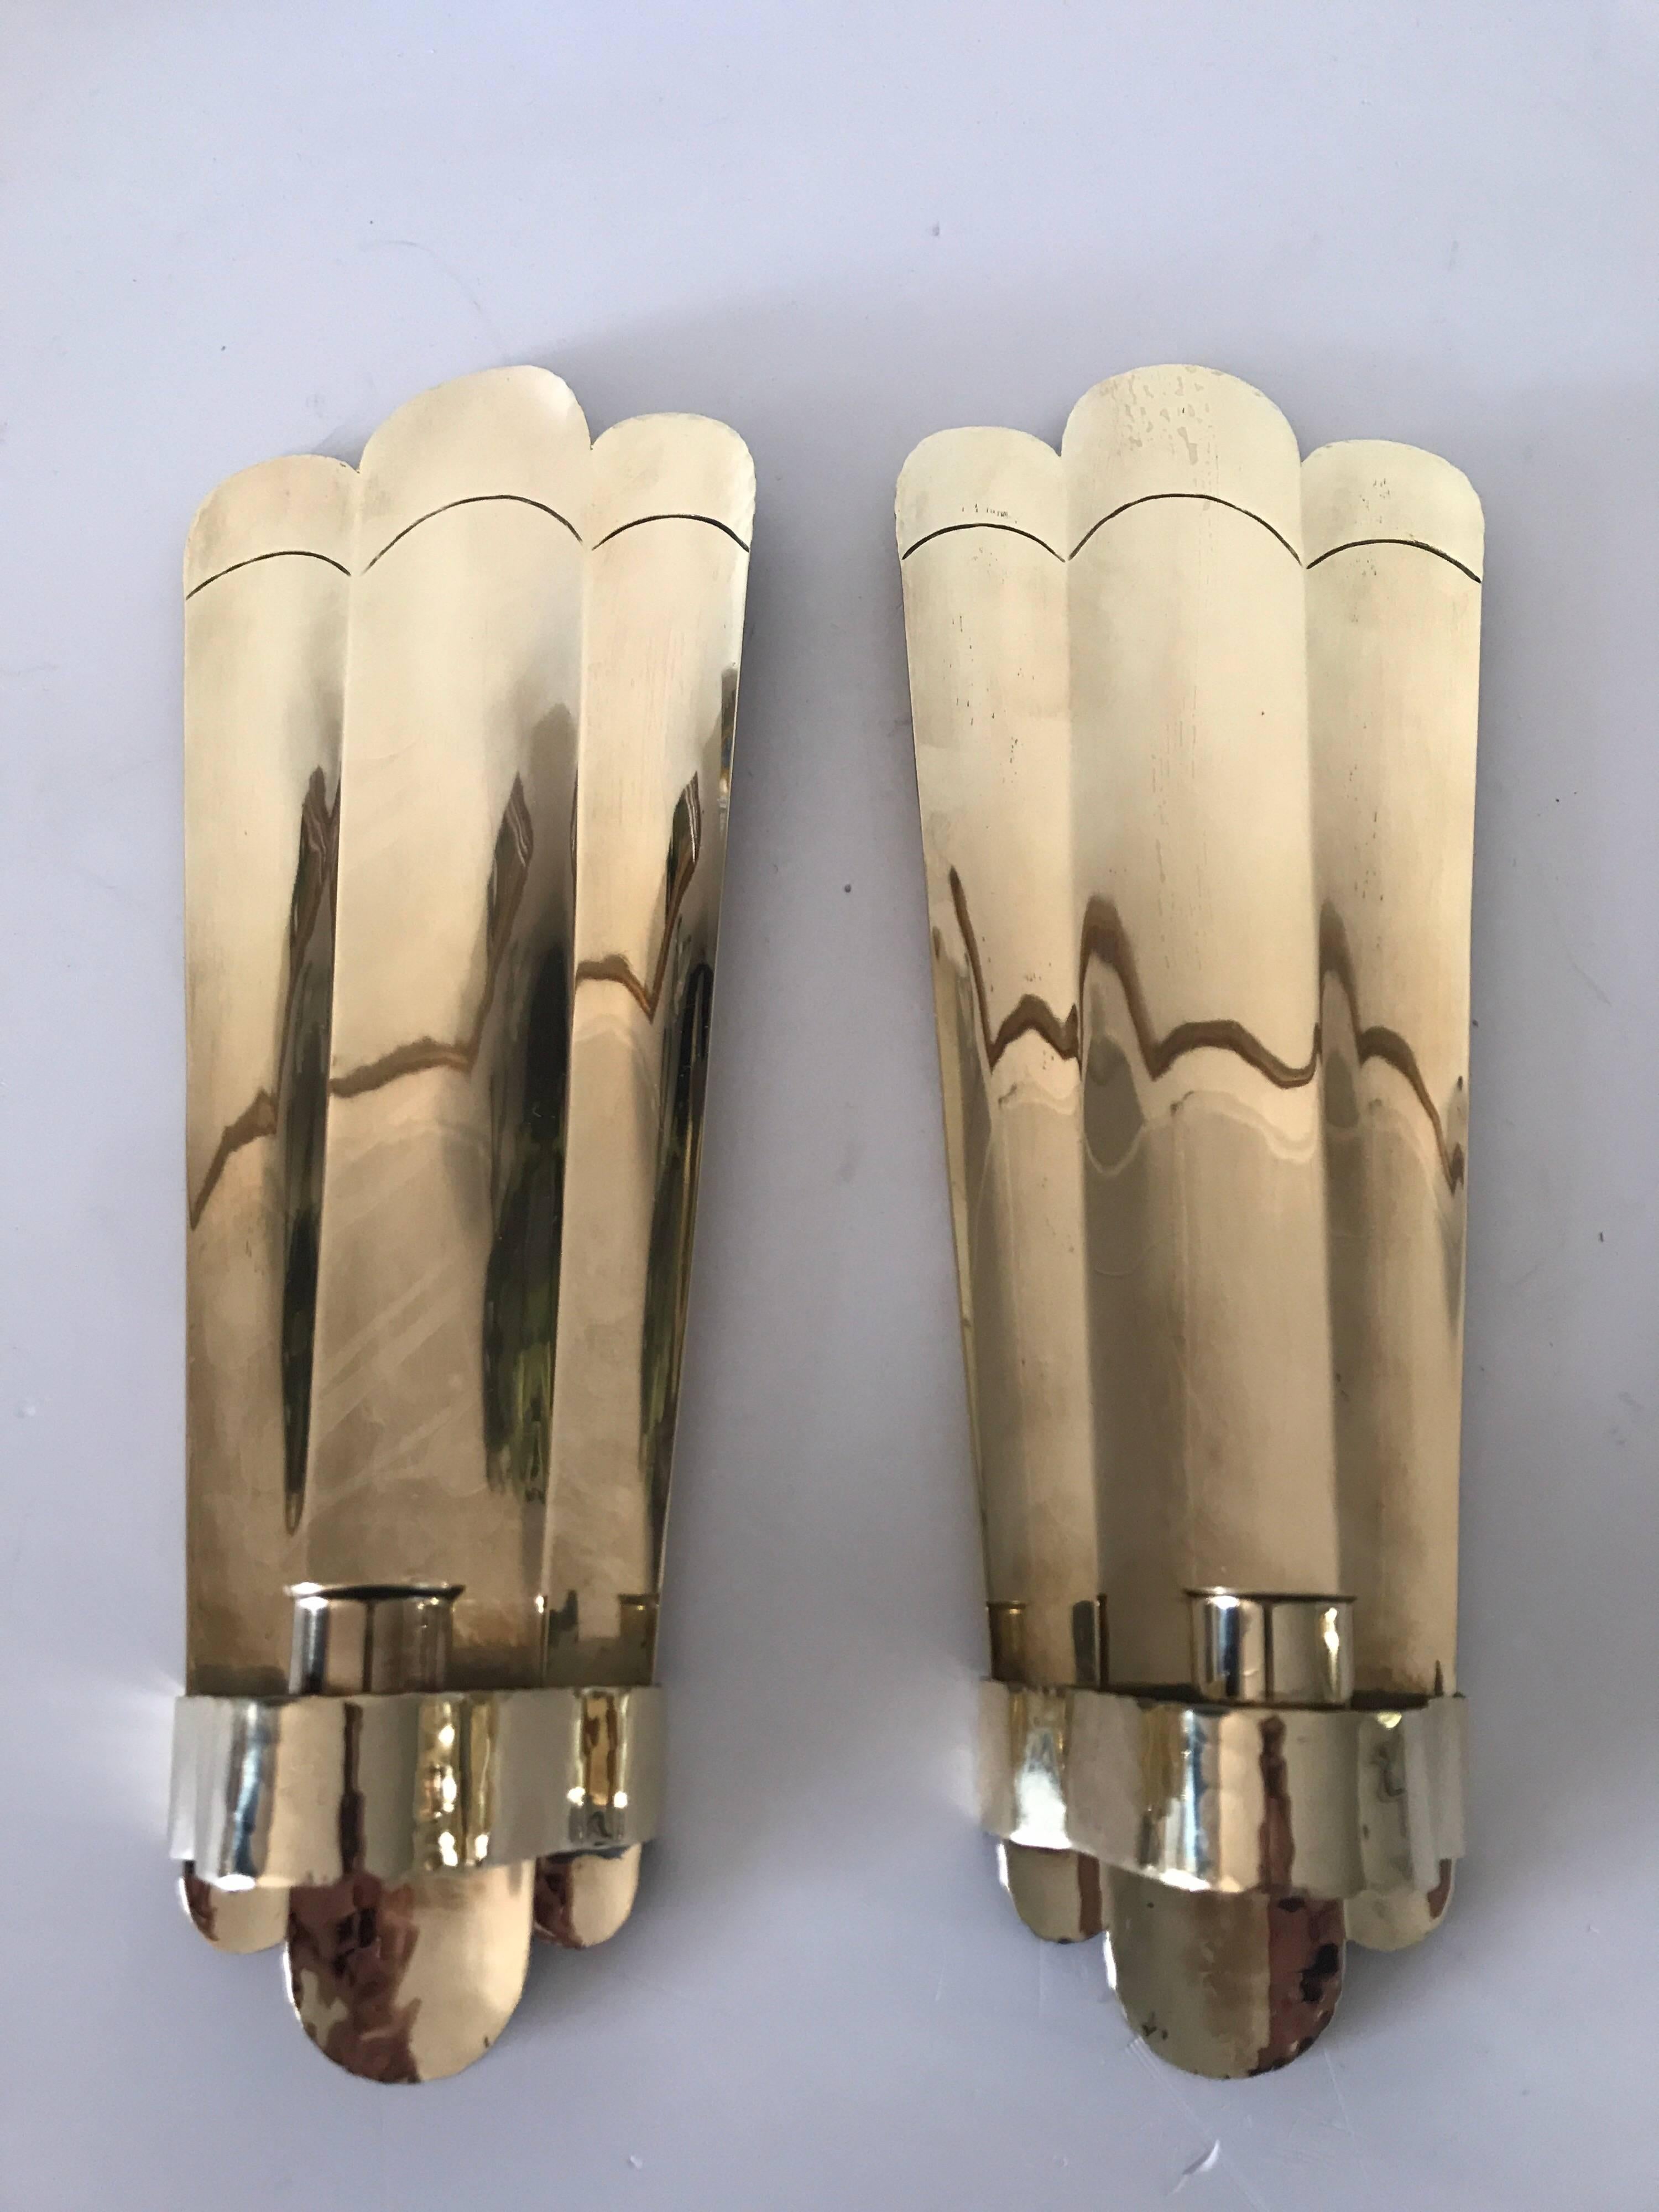 Swedish Art Deco brass wall sconces or wall candleholders by C & N Svängsta.
A nice pair of polished brass candle holders, partly hammered pattern to the top and the bottom part. They measure 34.5 cm in height, the top part is 13 cm wide, the base